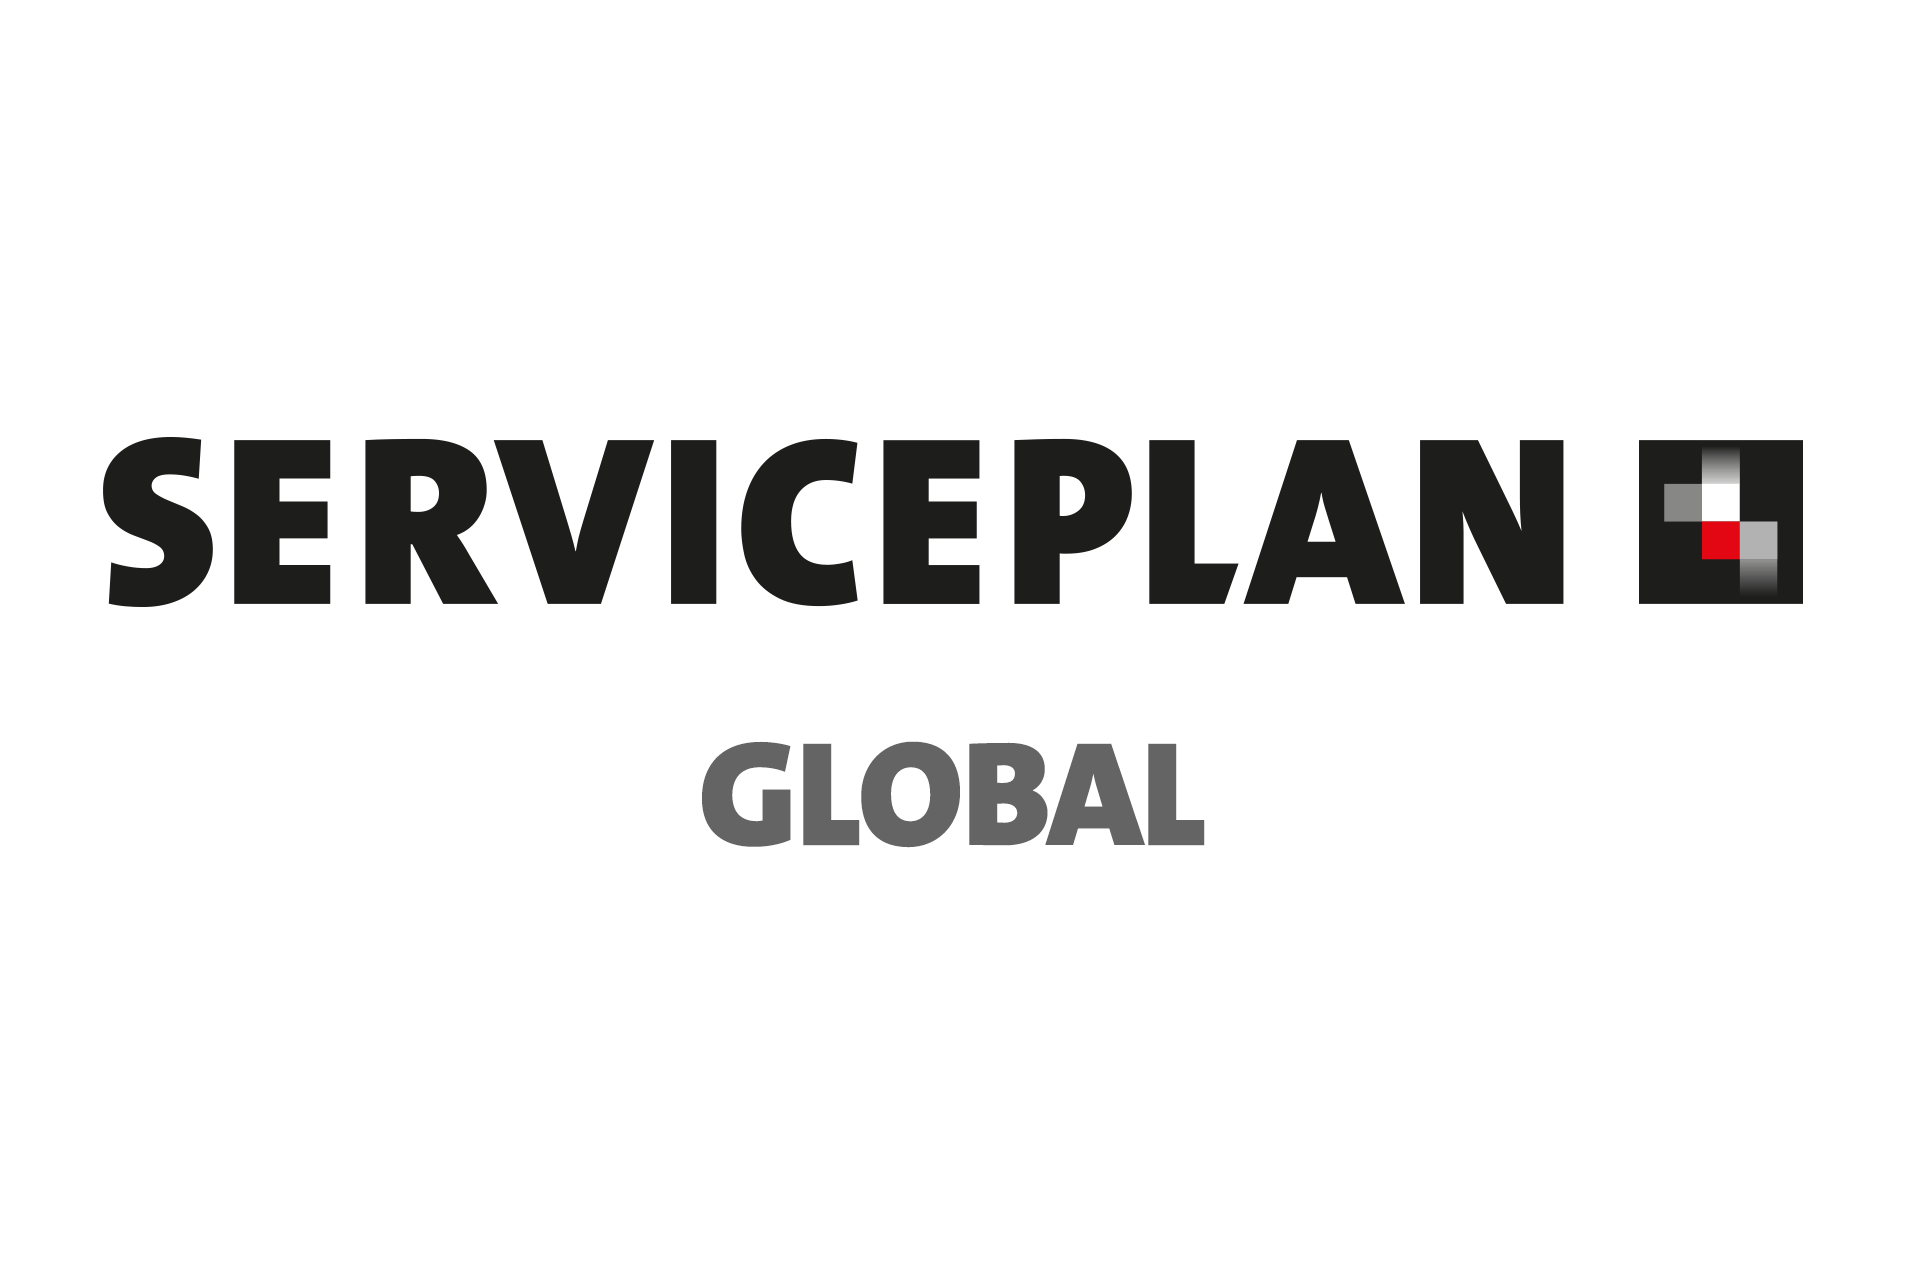 Serviceplan Wins 2019 LIA Global Independent Agency of The Year Award